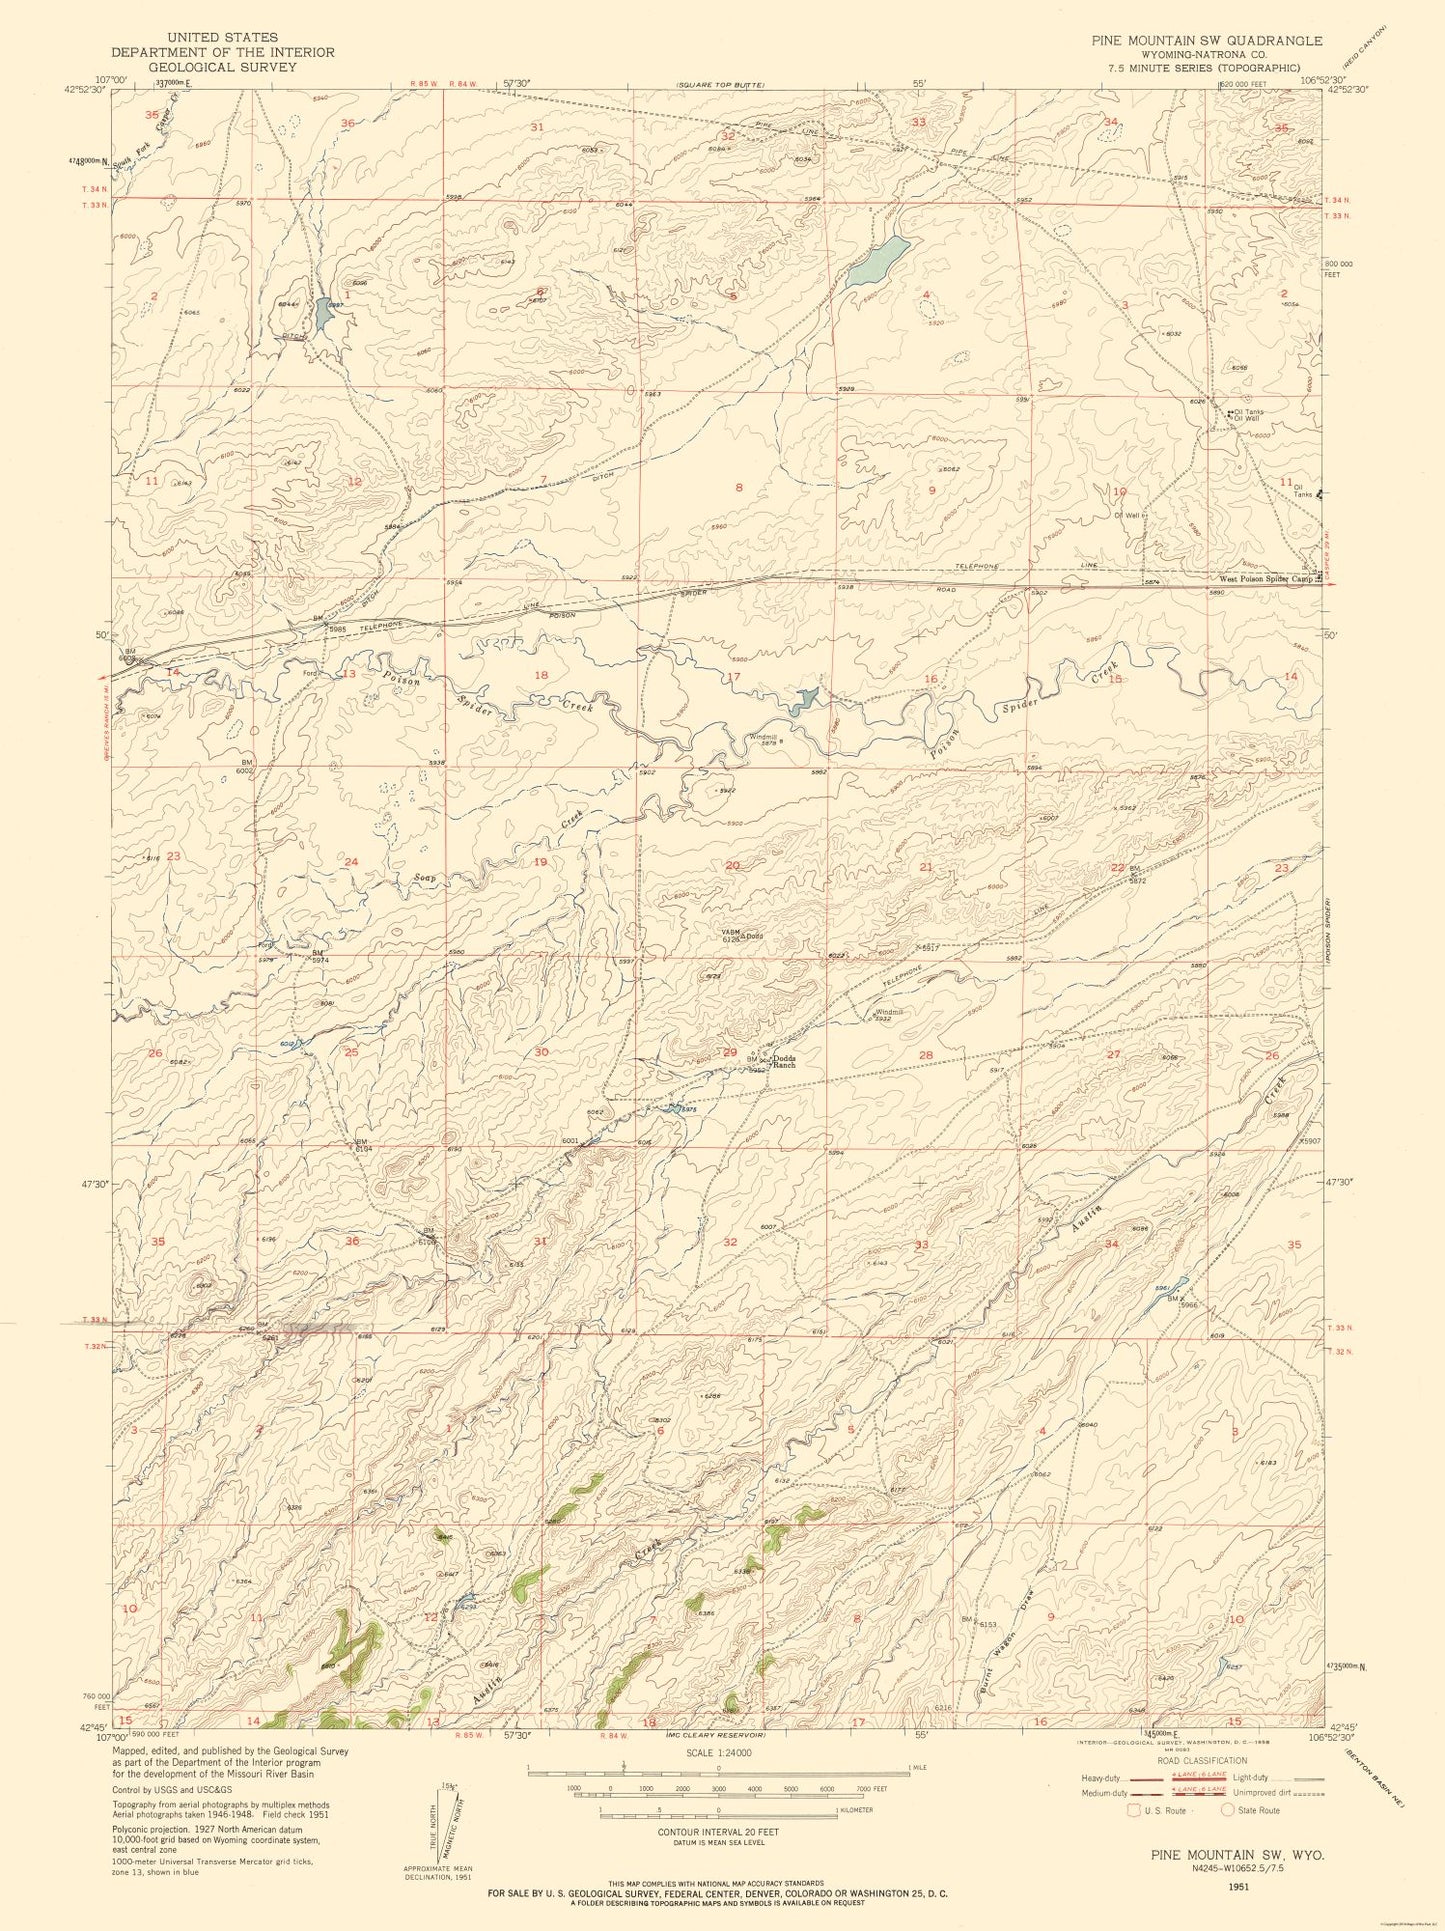 Topographical Map - Pine Mountain Wyoming Quad - USGS 1951 - 23 x 30.72 - Vintage Wall Art